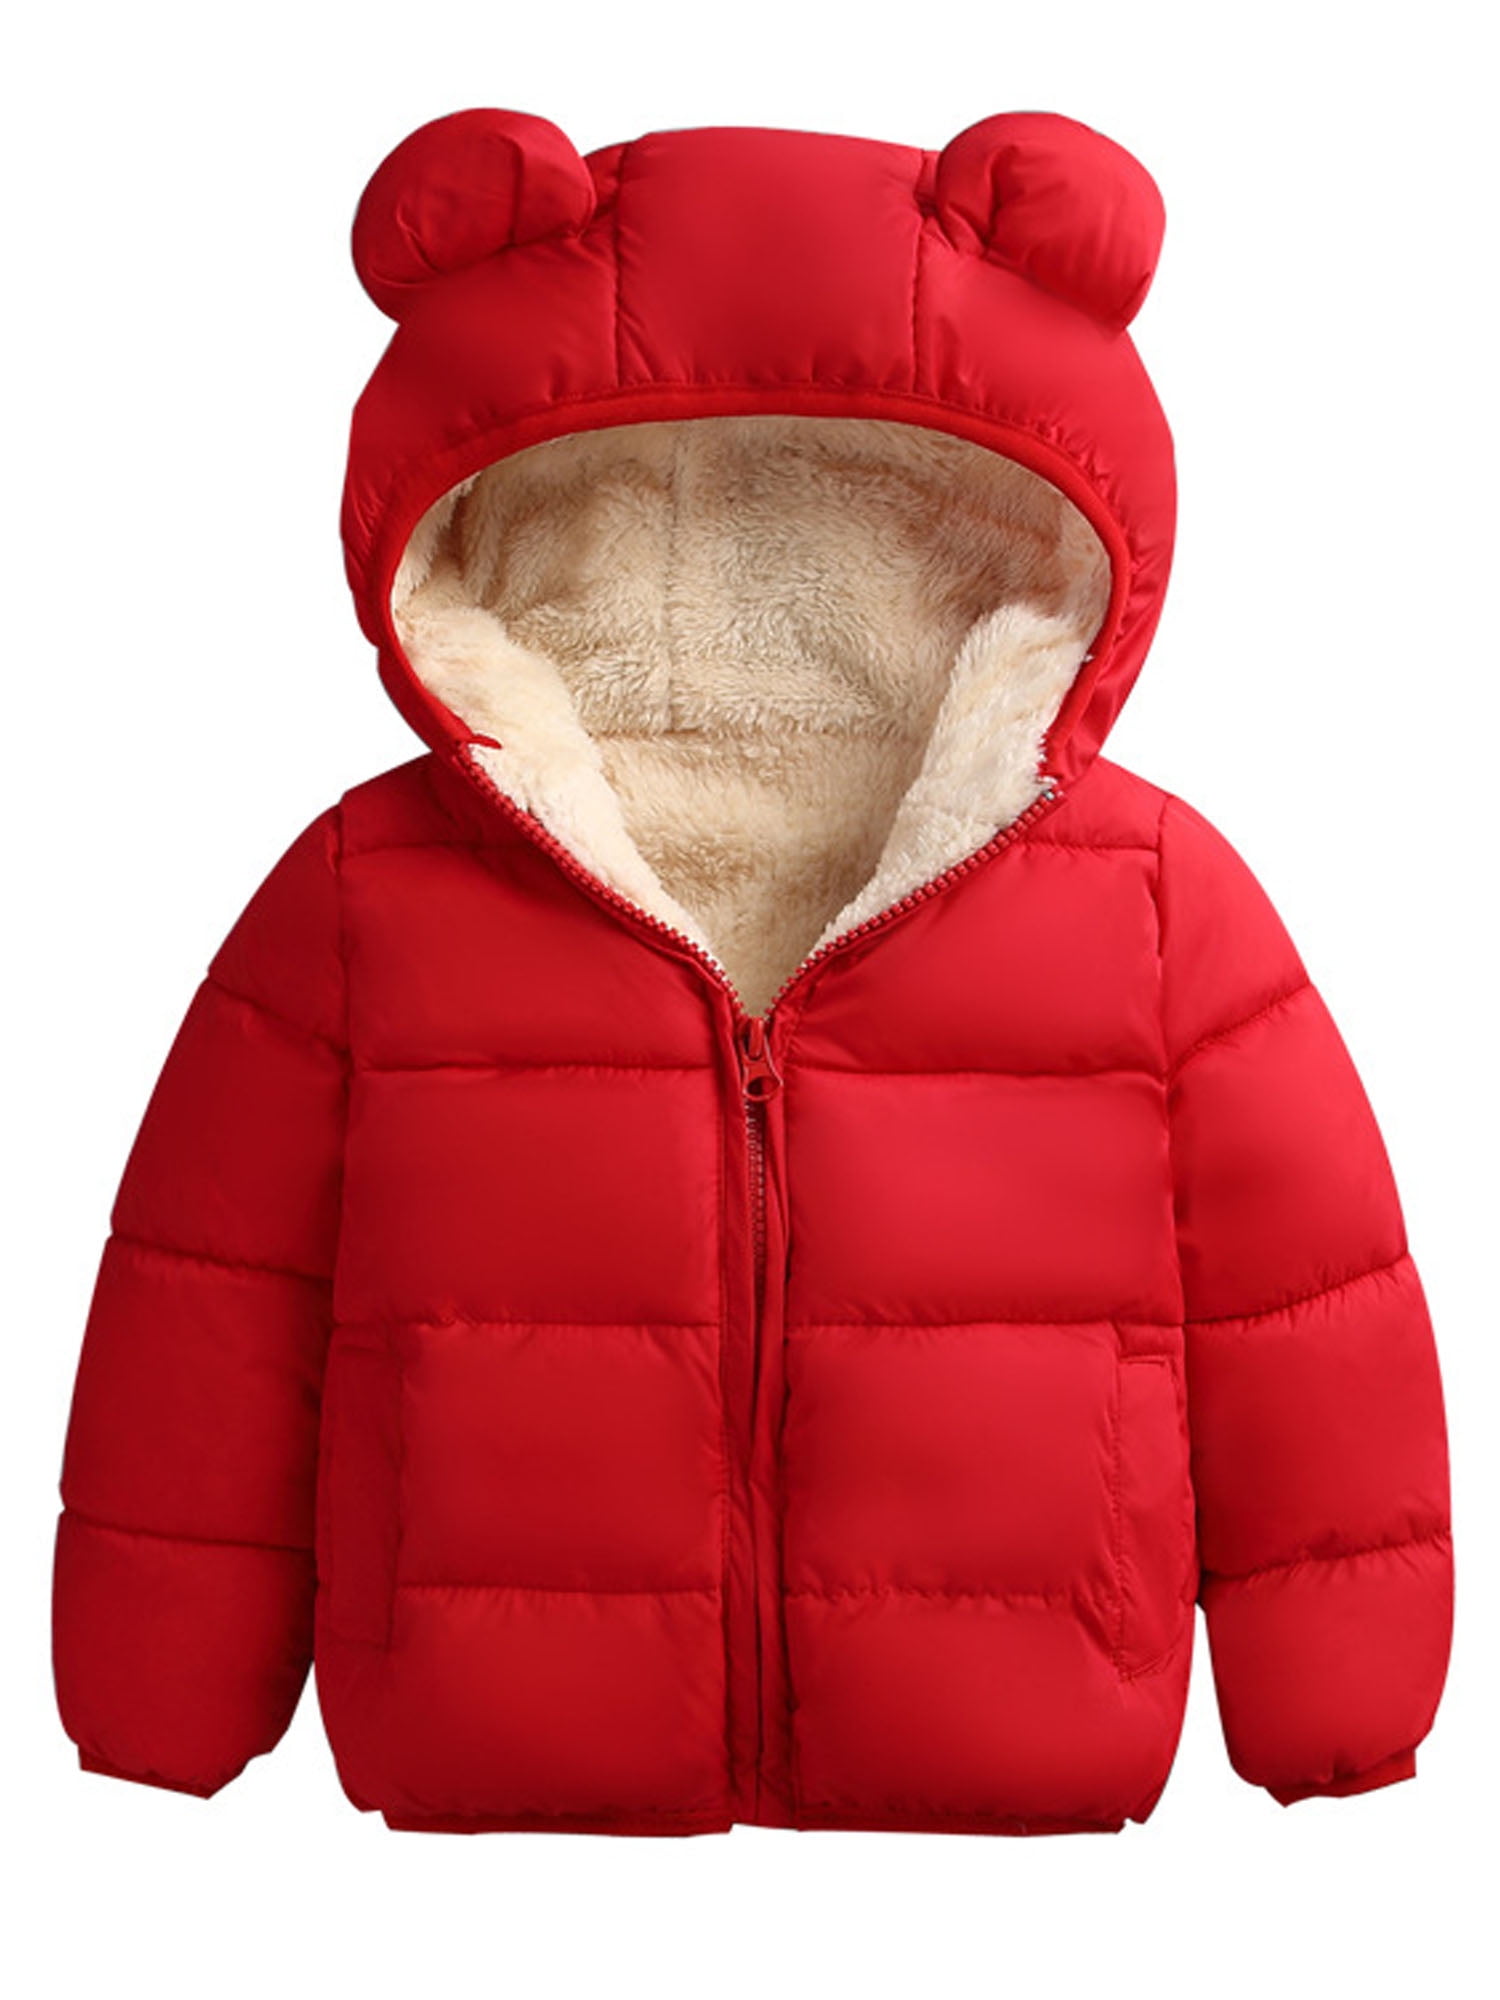  linqin Brown Plain Toddler Fleece Jacket With Hood Boys  Outerwear Jackets Pink Fall Baby Boy Clothes 6T: Clothing, Shoes & Jewelry